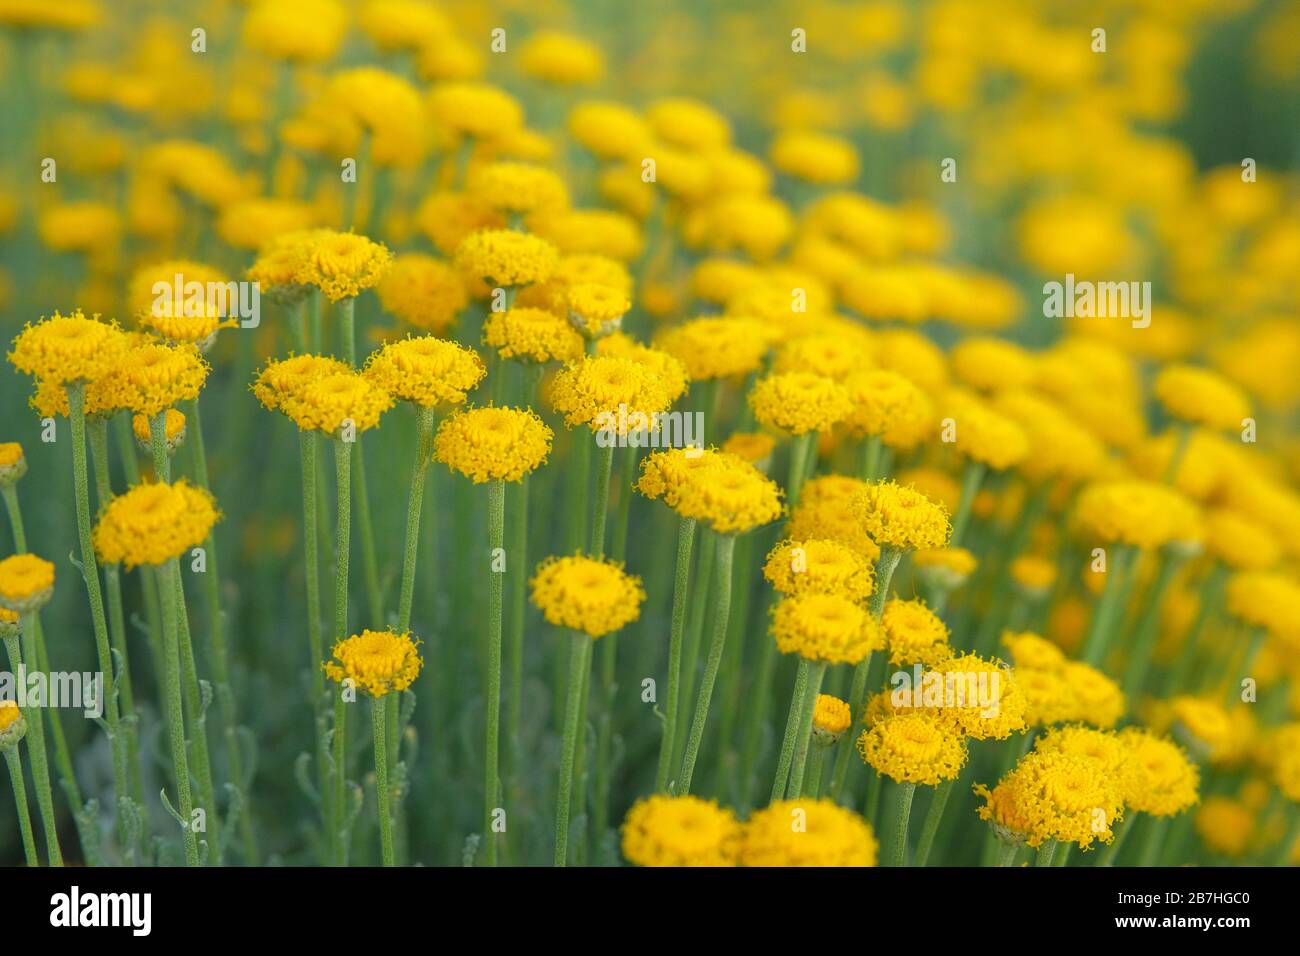 Helichrysum flowers and bee on green nature blurred background. Yellow flowers for herbalism. Medicinal herb. Stock Photo